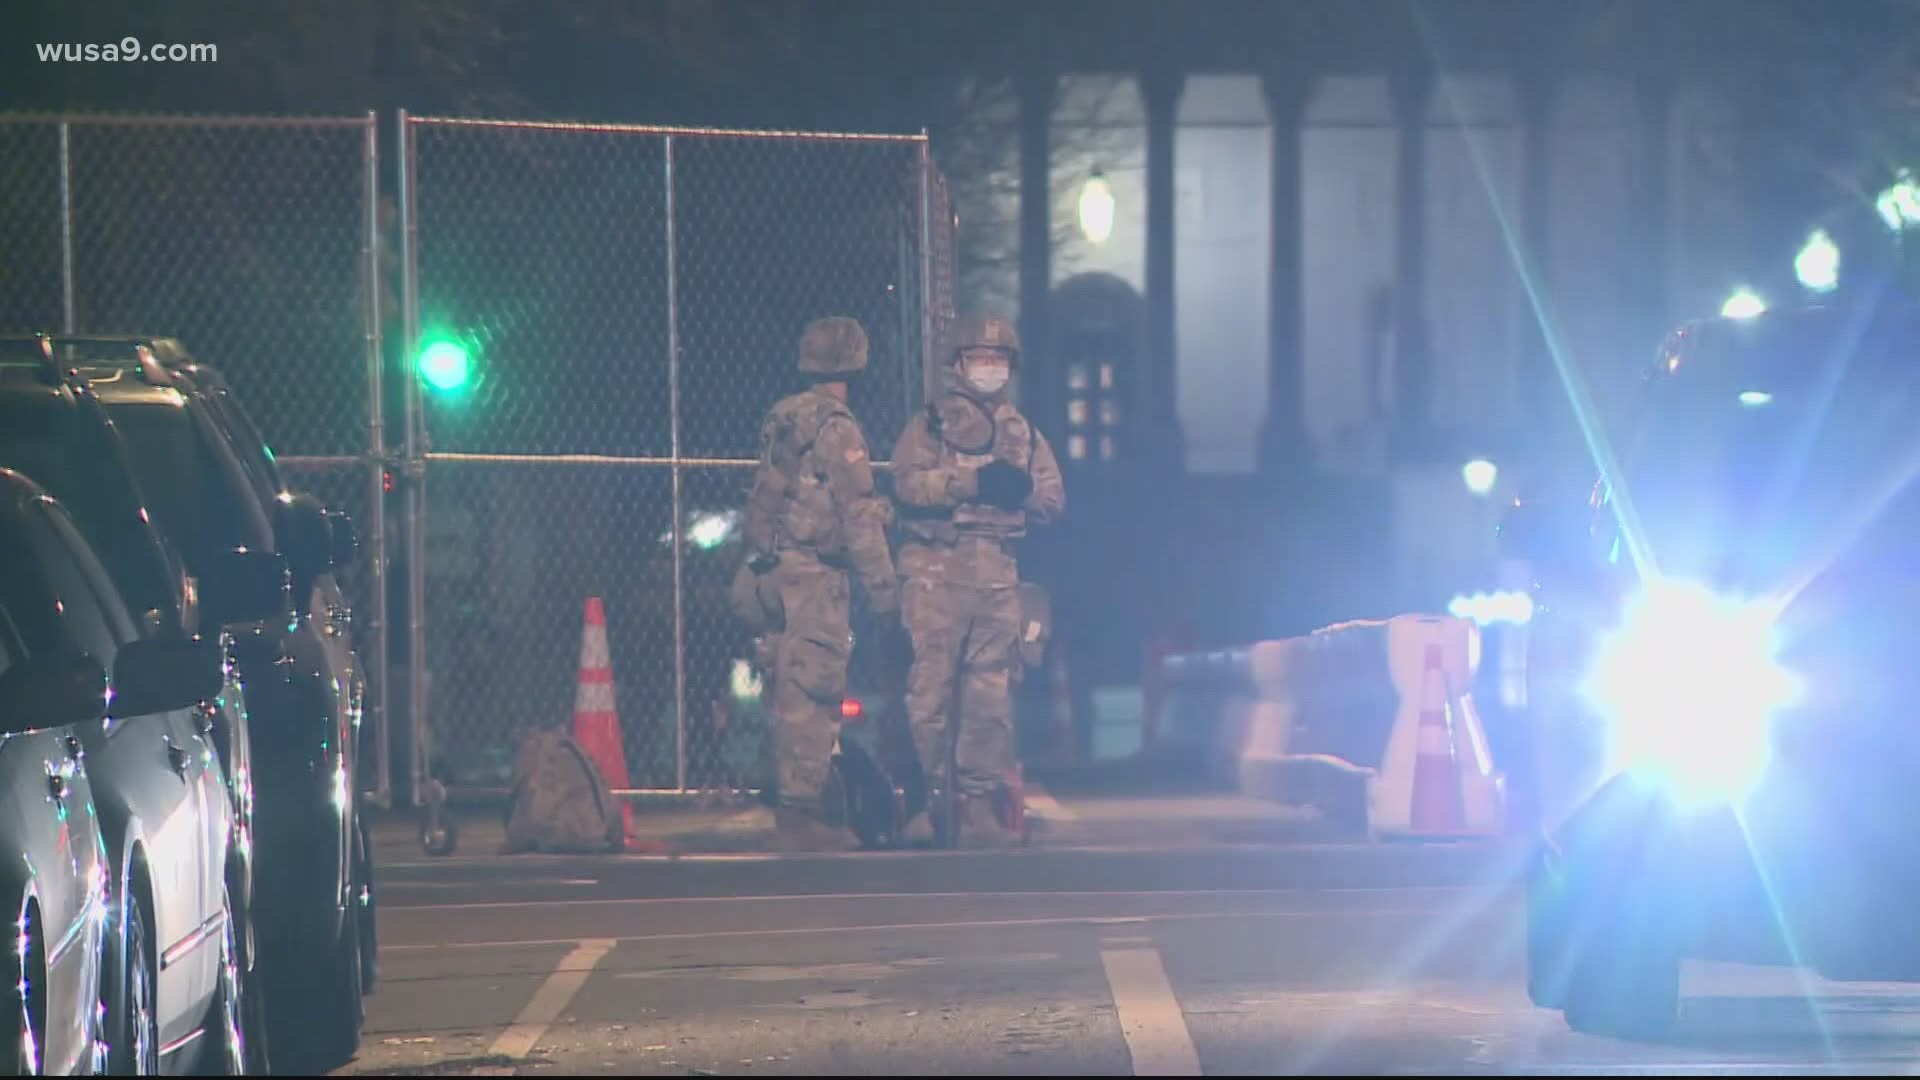 Defense Secretary Lloyd Austin says March 12 is the expected date for National Guard troops to leave the Capitol. They've been deployed since the Jan. 6 riot.